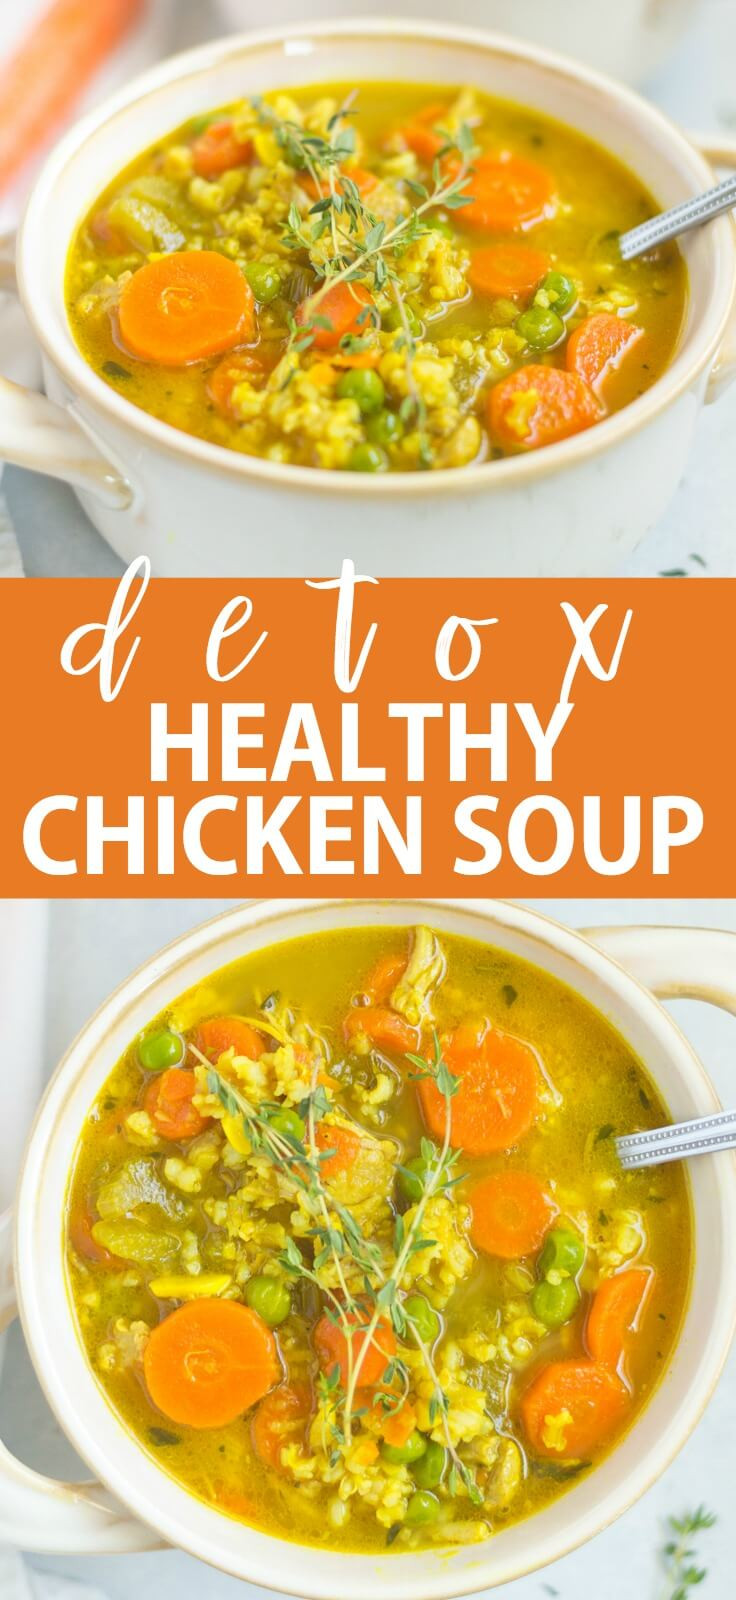 Healthy Chicken Soup Recipes
 The Best Healthy Chicken Soup Recipe